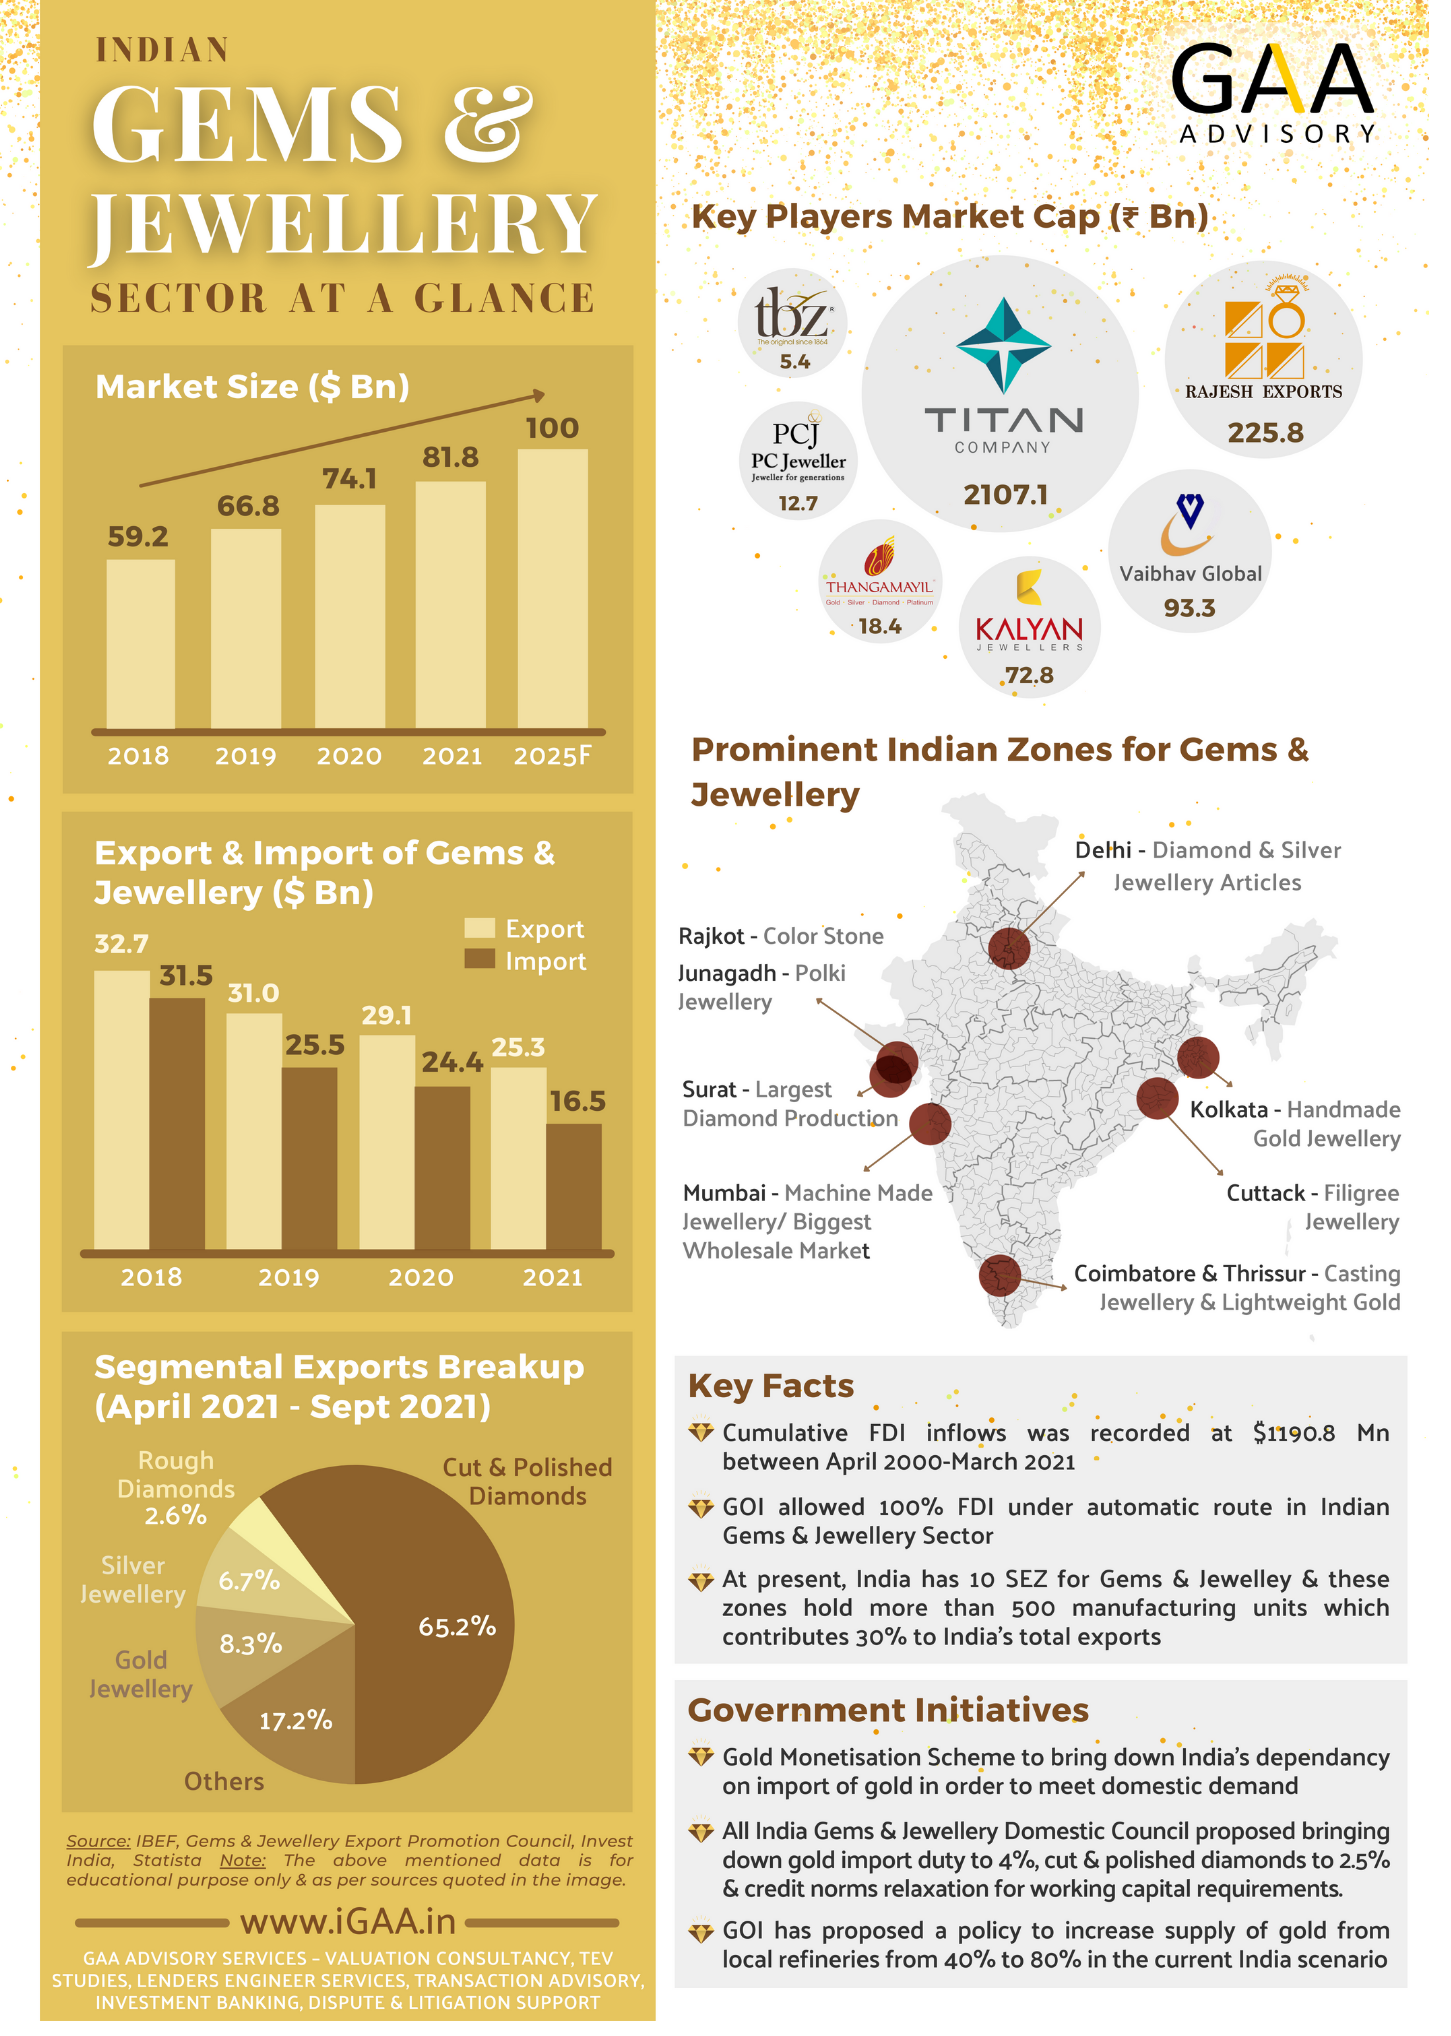 INDIAN GEMS & JEWELLERY SECTOR AT A GLANCE